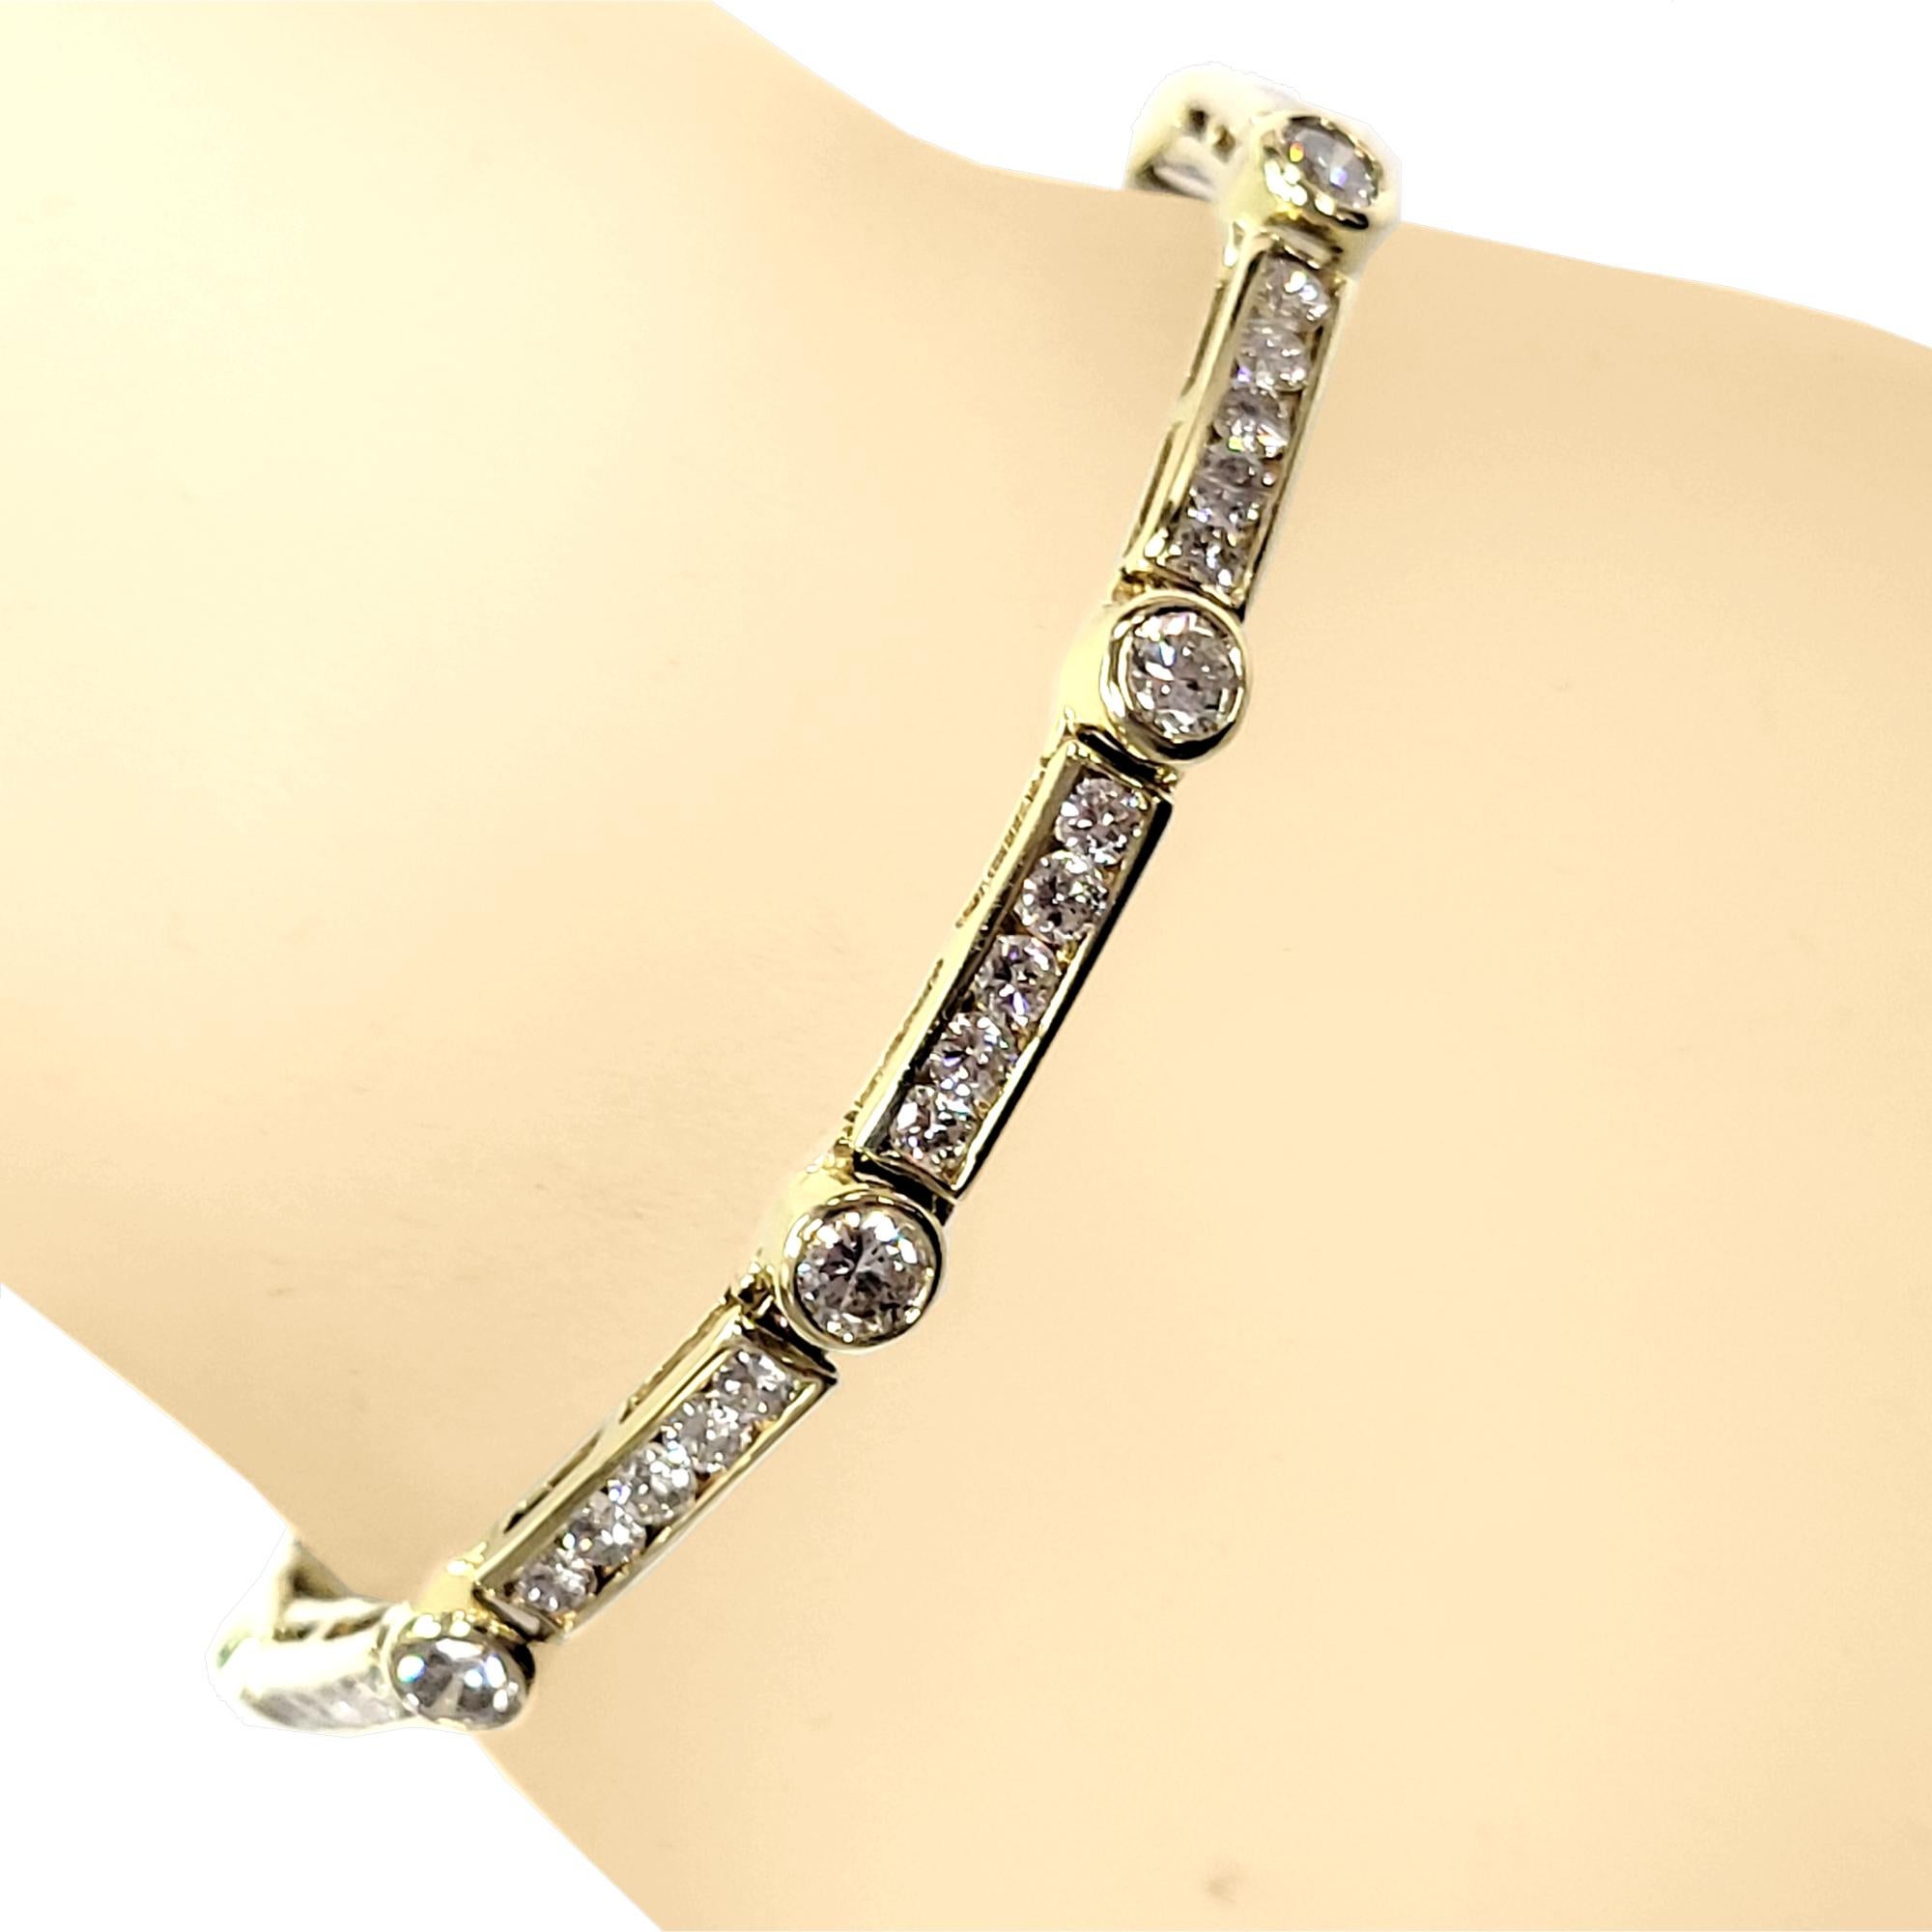 This Diamond Bracelet consists of 9 Links comprising of 9 Bezels Set with 3.5 mm Round Brilliant diamonds and p bars Pave Set with 45 2.7 mm Round Brilliant diamonds . The bracelet is made in 14K Yellow Gold.  The bracelet comes with a built in lock